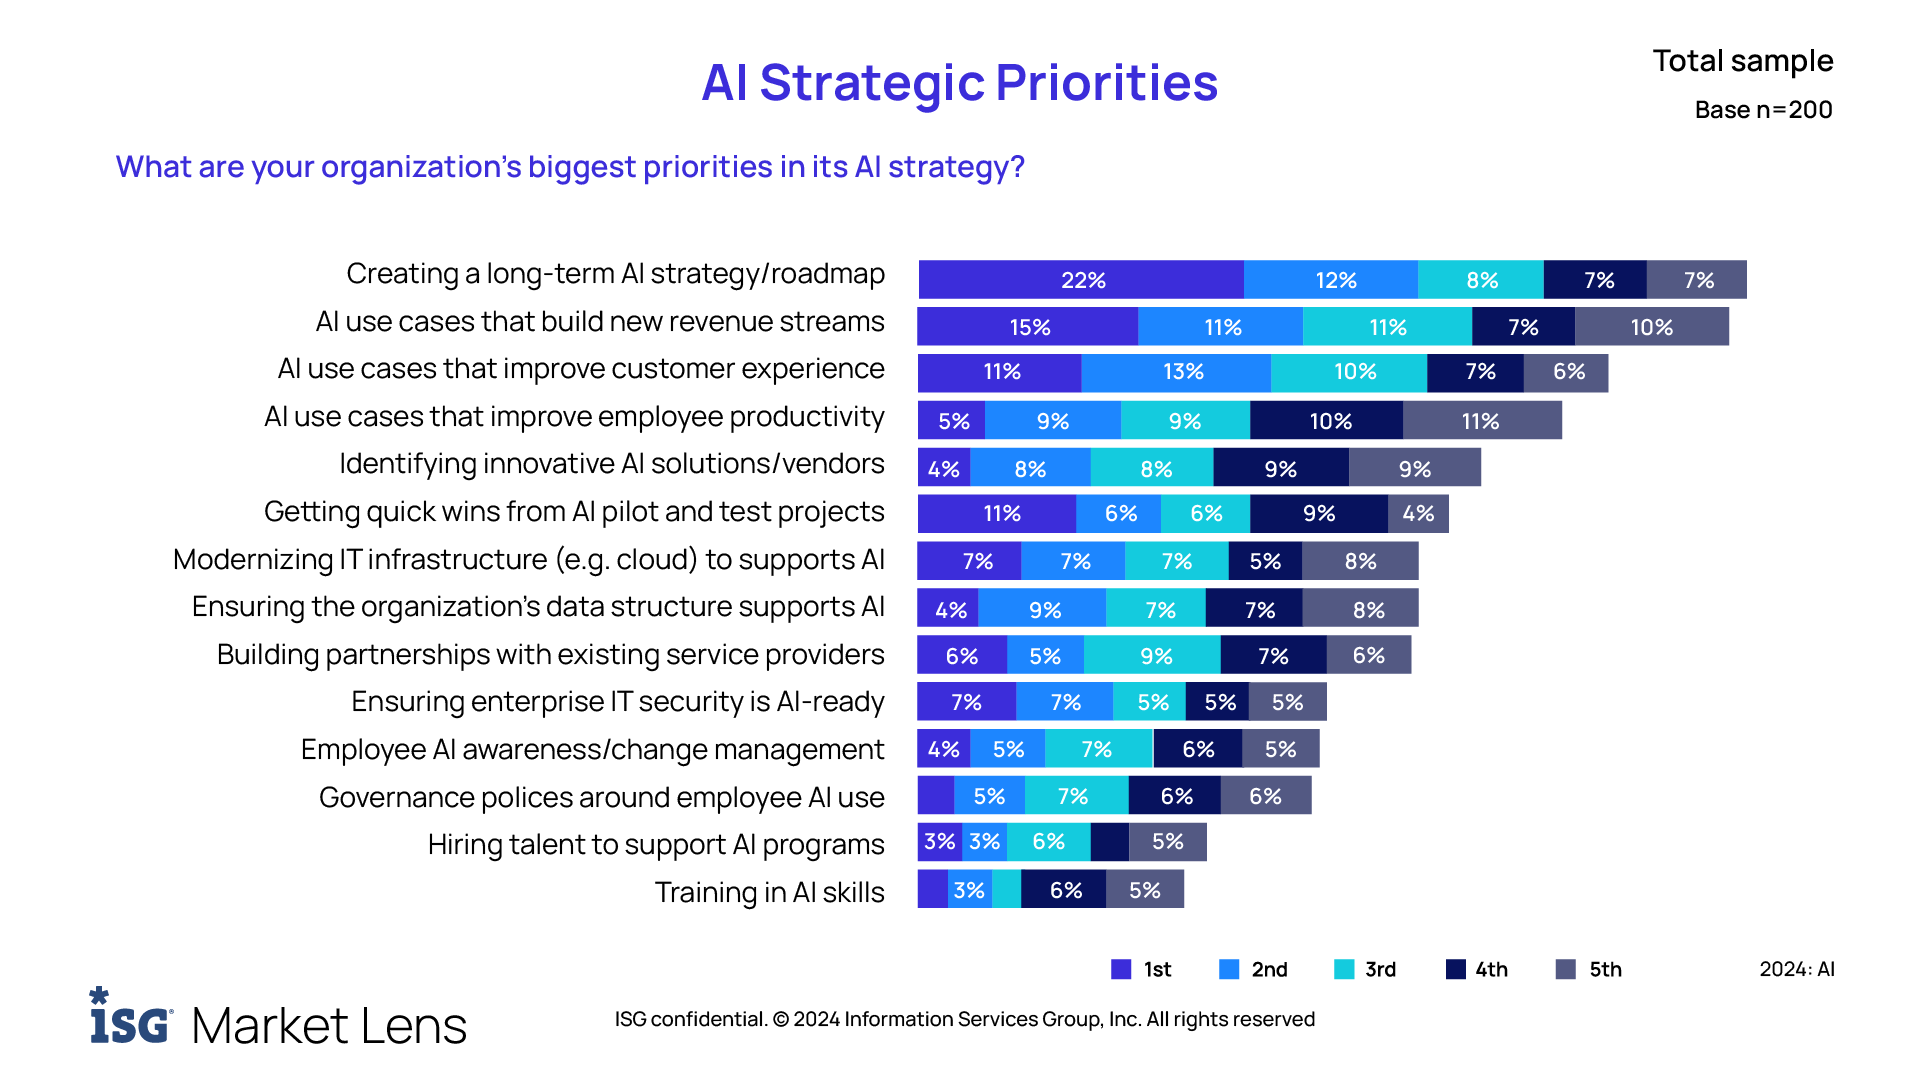 What are your organization's biggest priorities in its AI strategy?